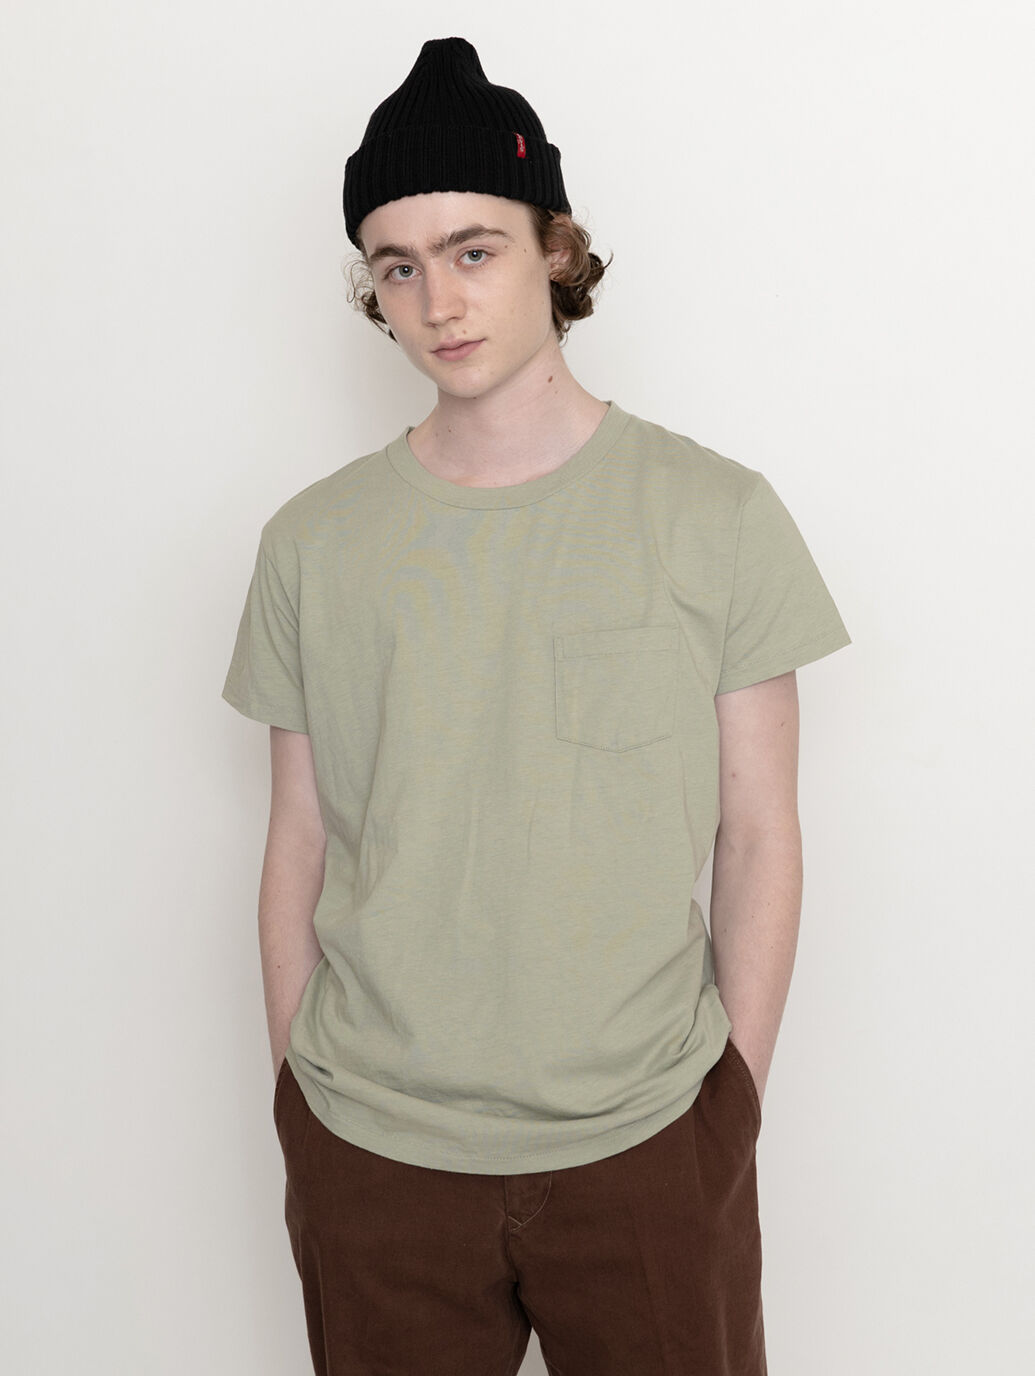 LEVI'S® VINTAGE CLOTHING 1950'S SPORTSWEAR Tシャツ SEAGRASS